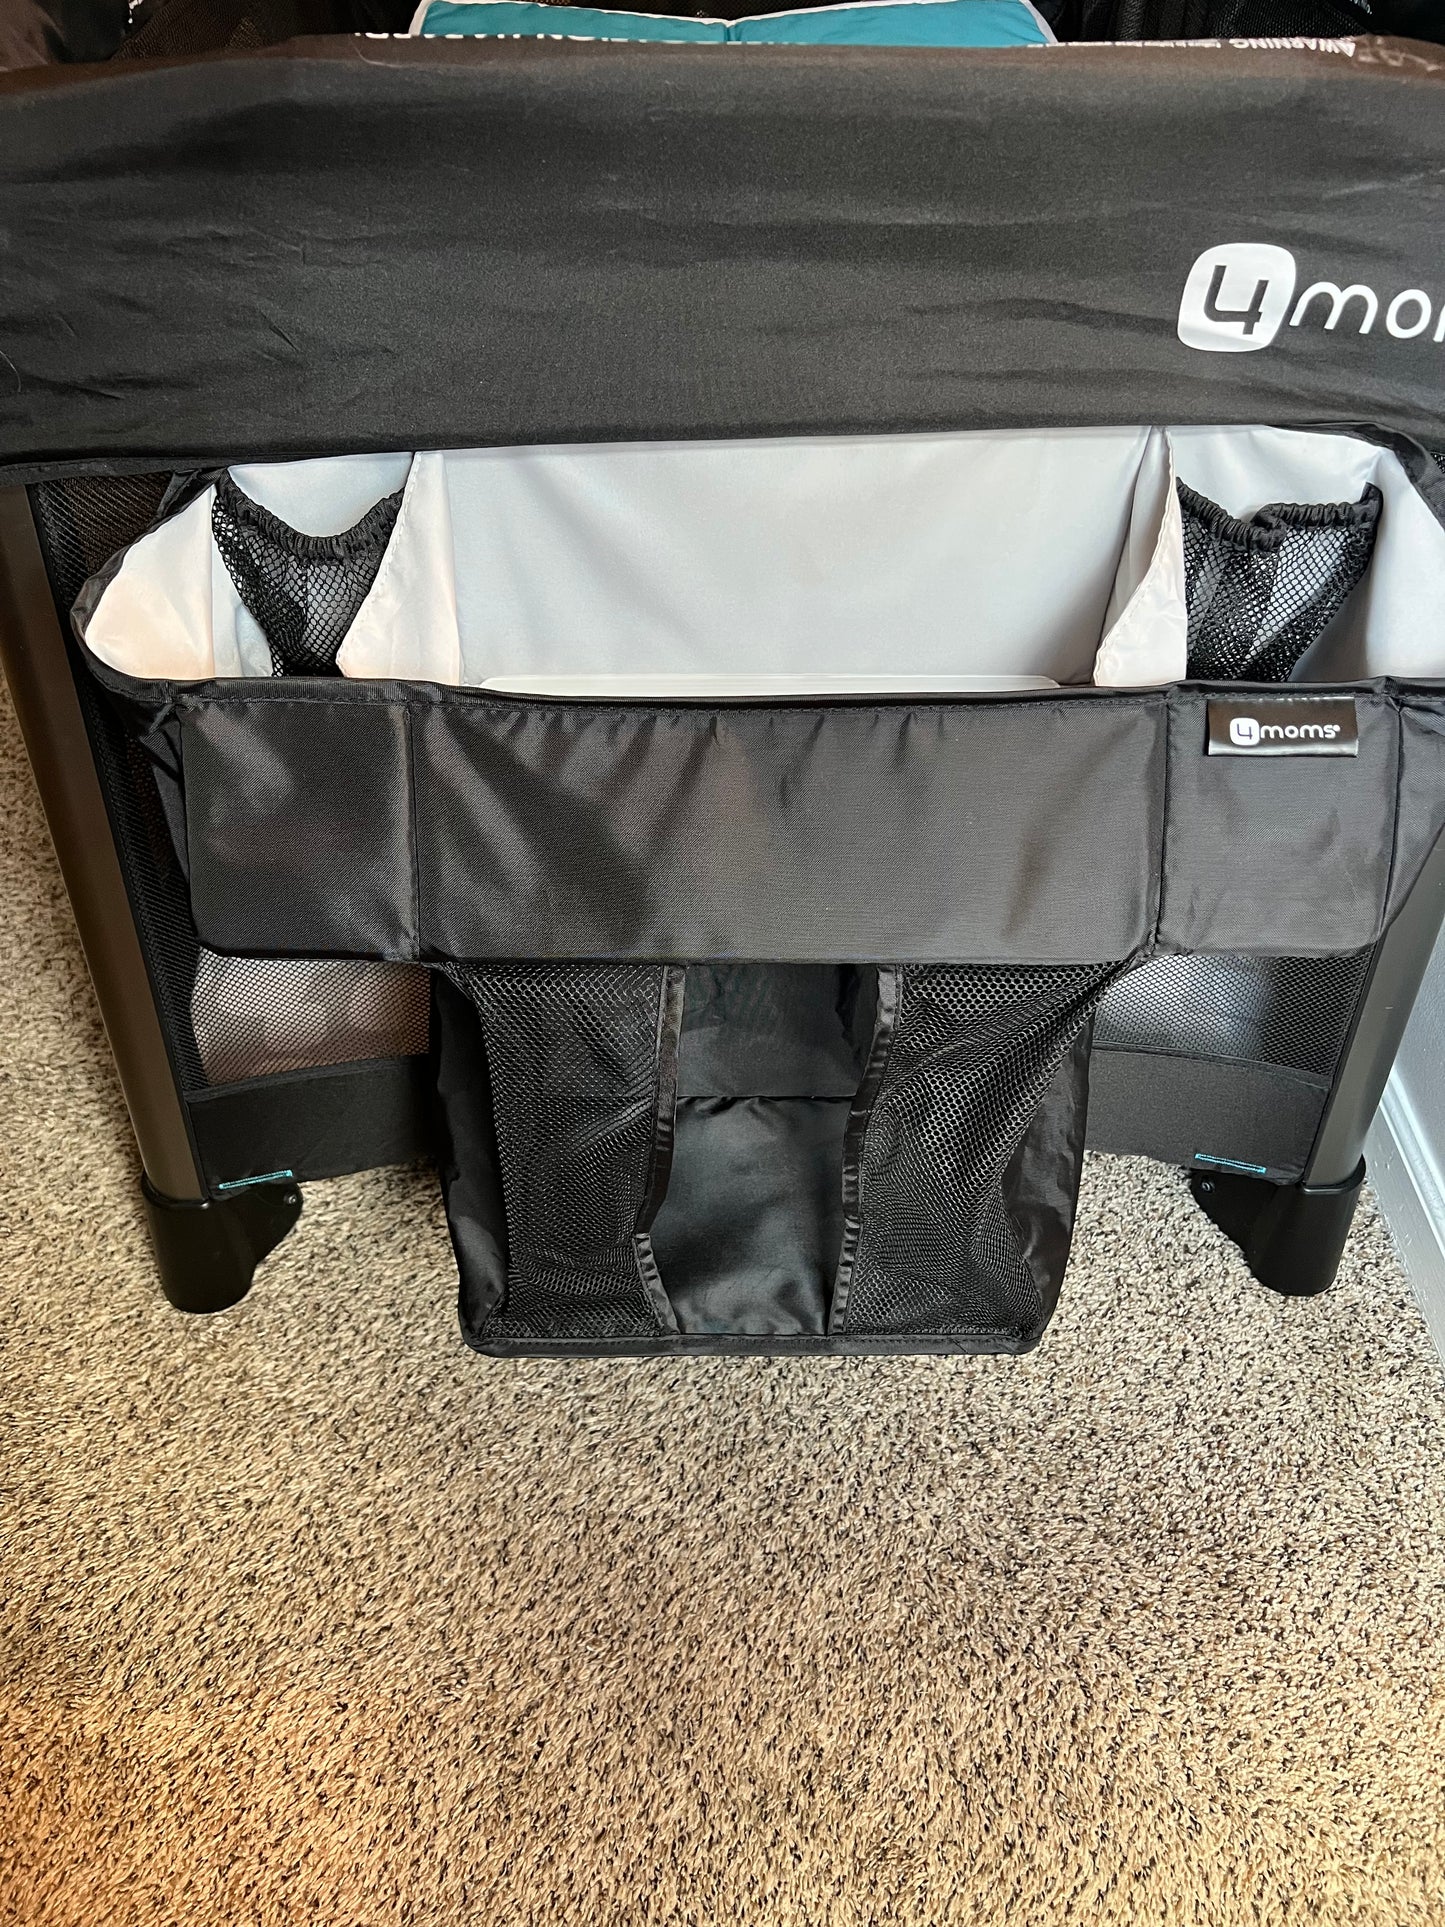 4Moms pack and play - easy to fold Comes with 2 sheets and the diaper caddy - porch pick up only 45230 - price reduced